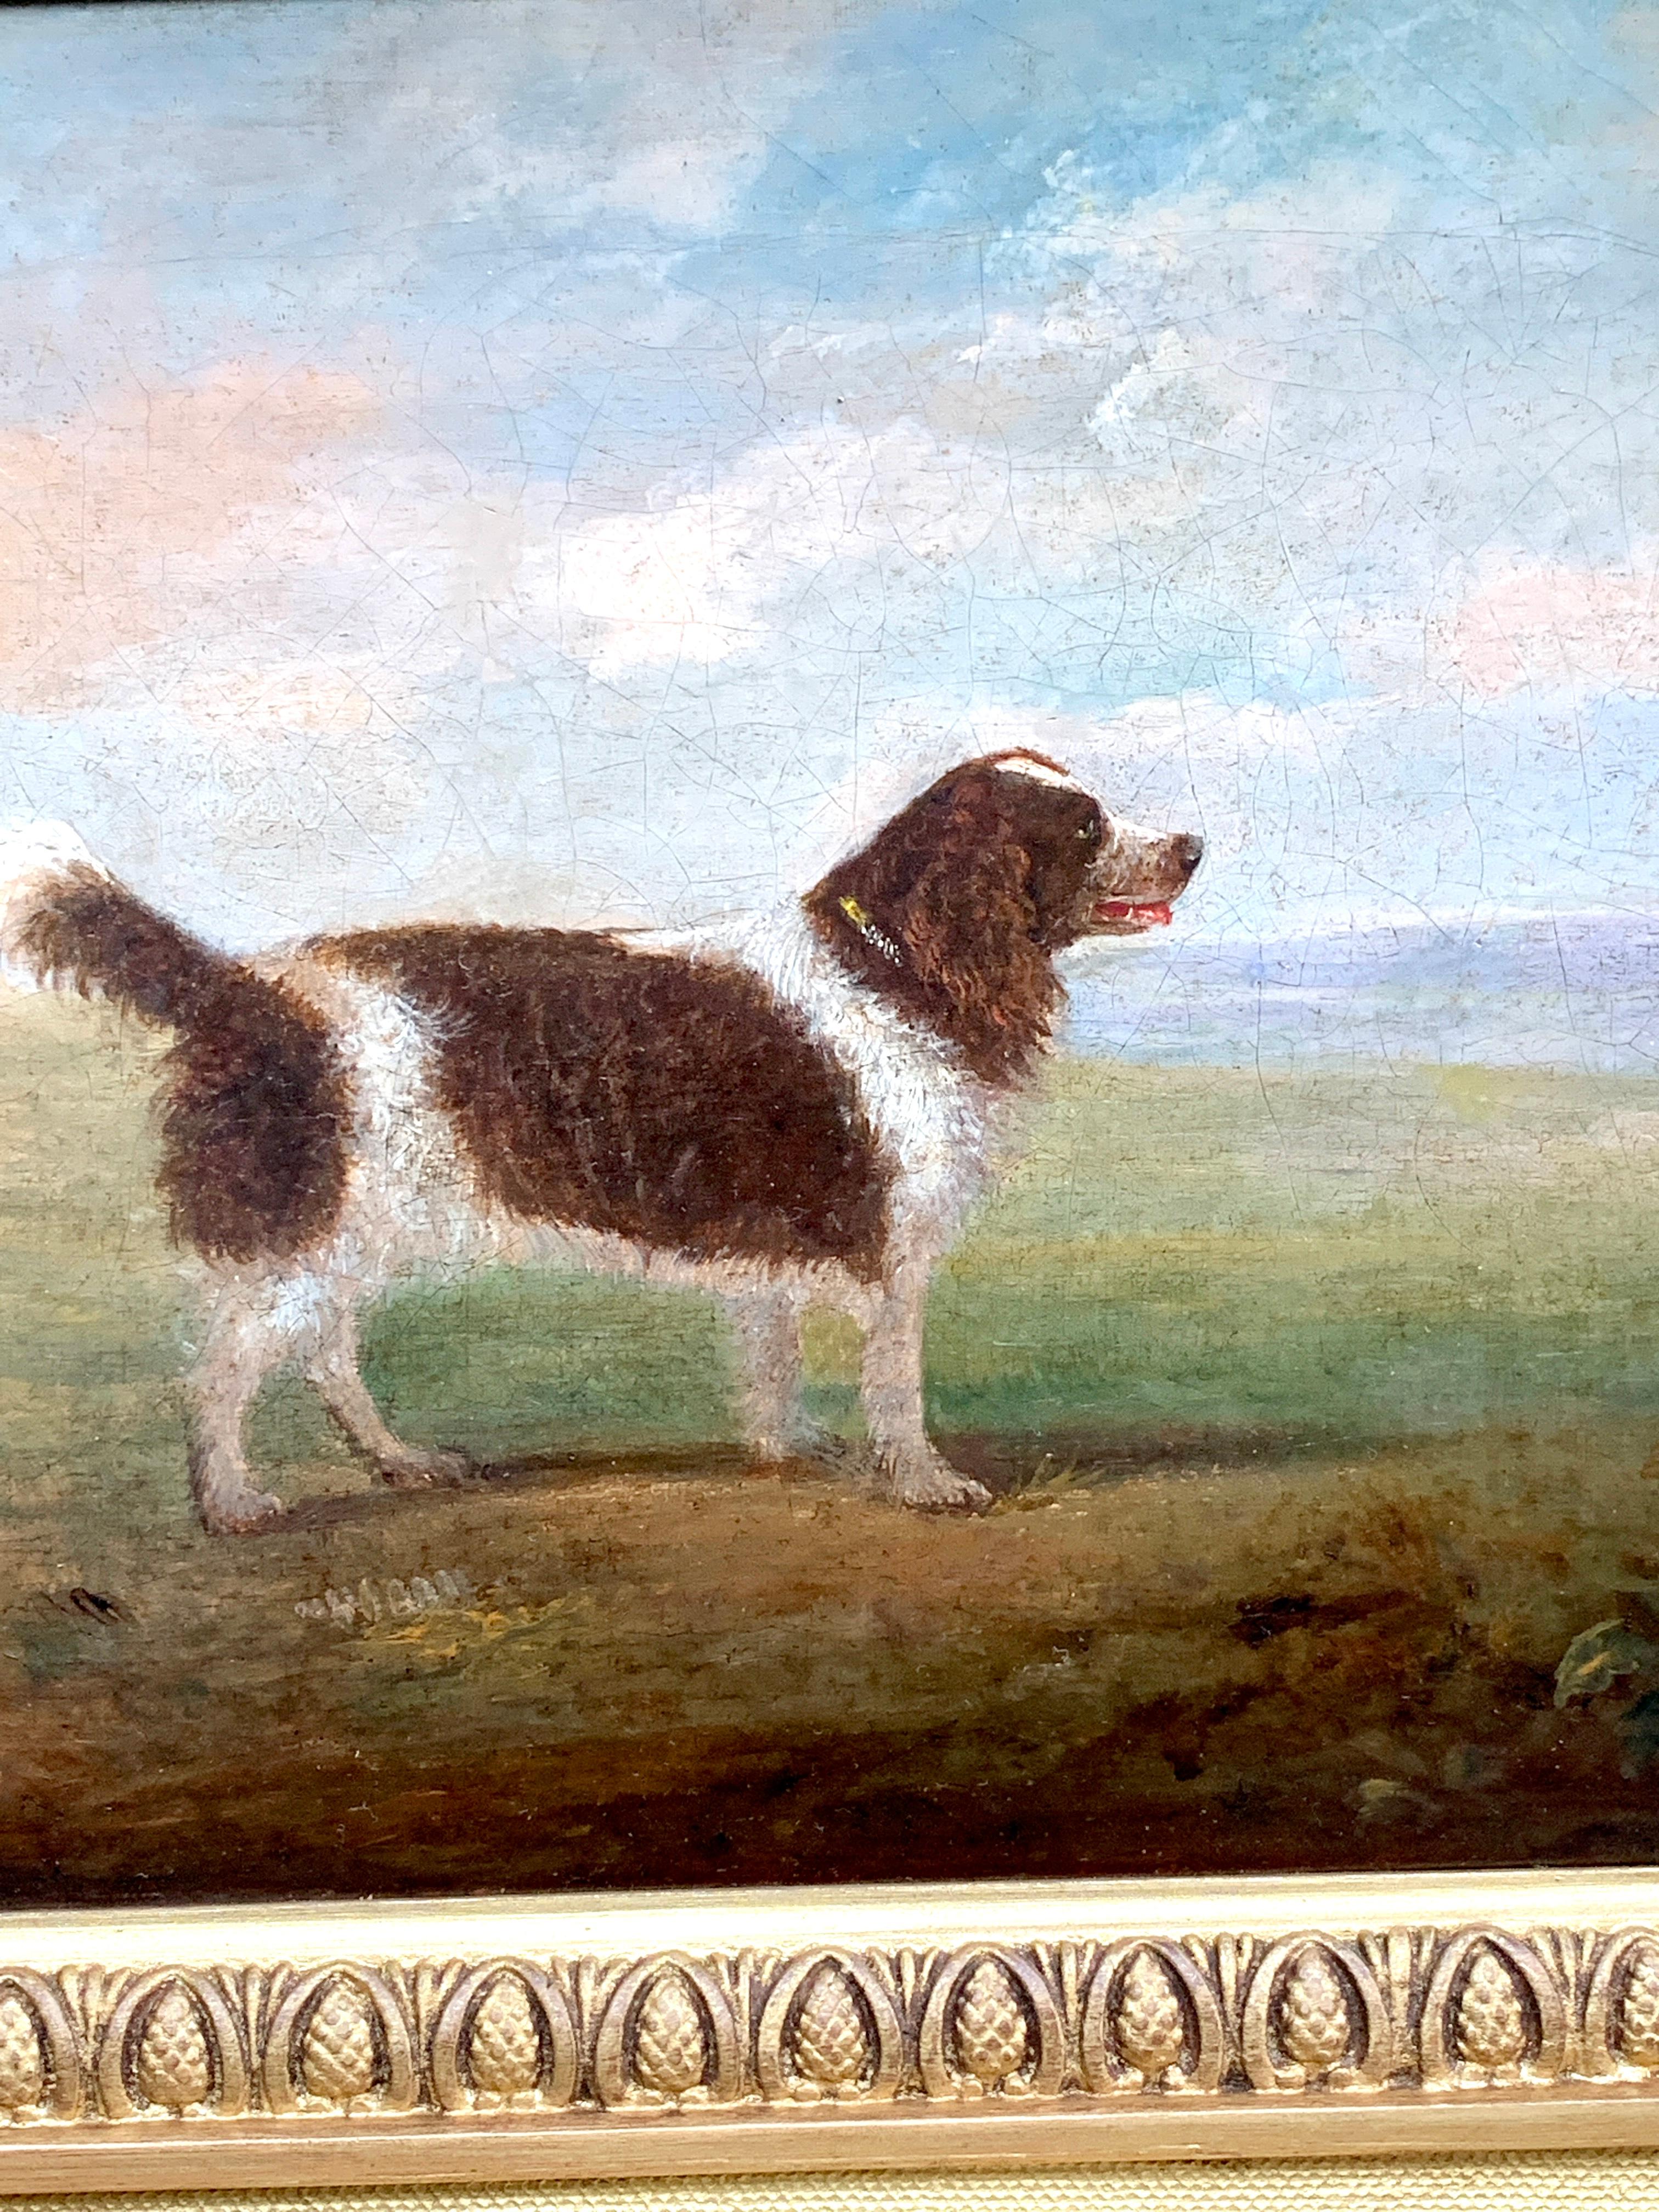 Antique 19th century English Folk Art Spaniel dog portrait in a landscape - Painting by Unknown